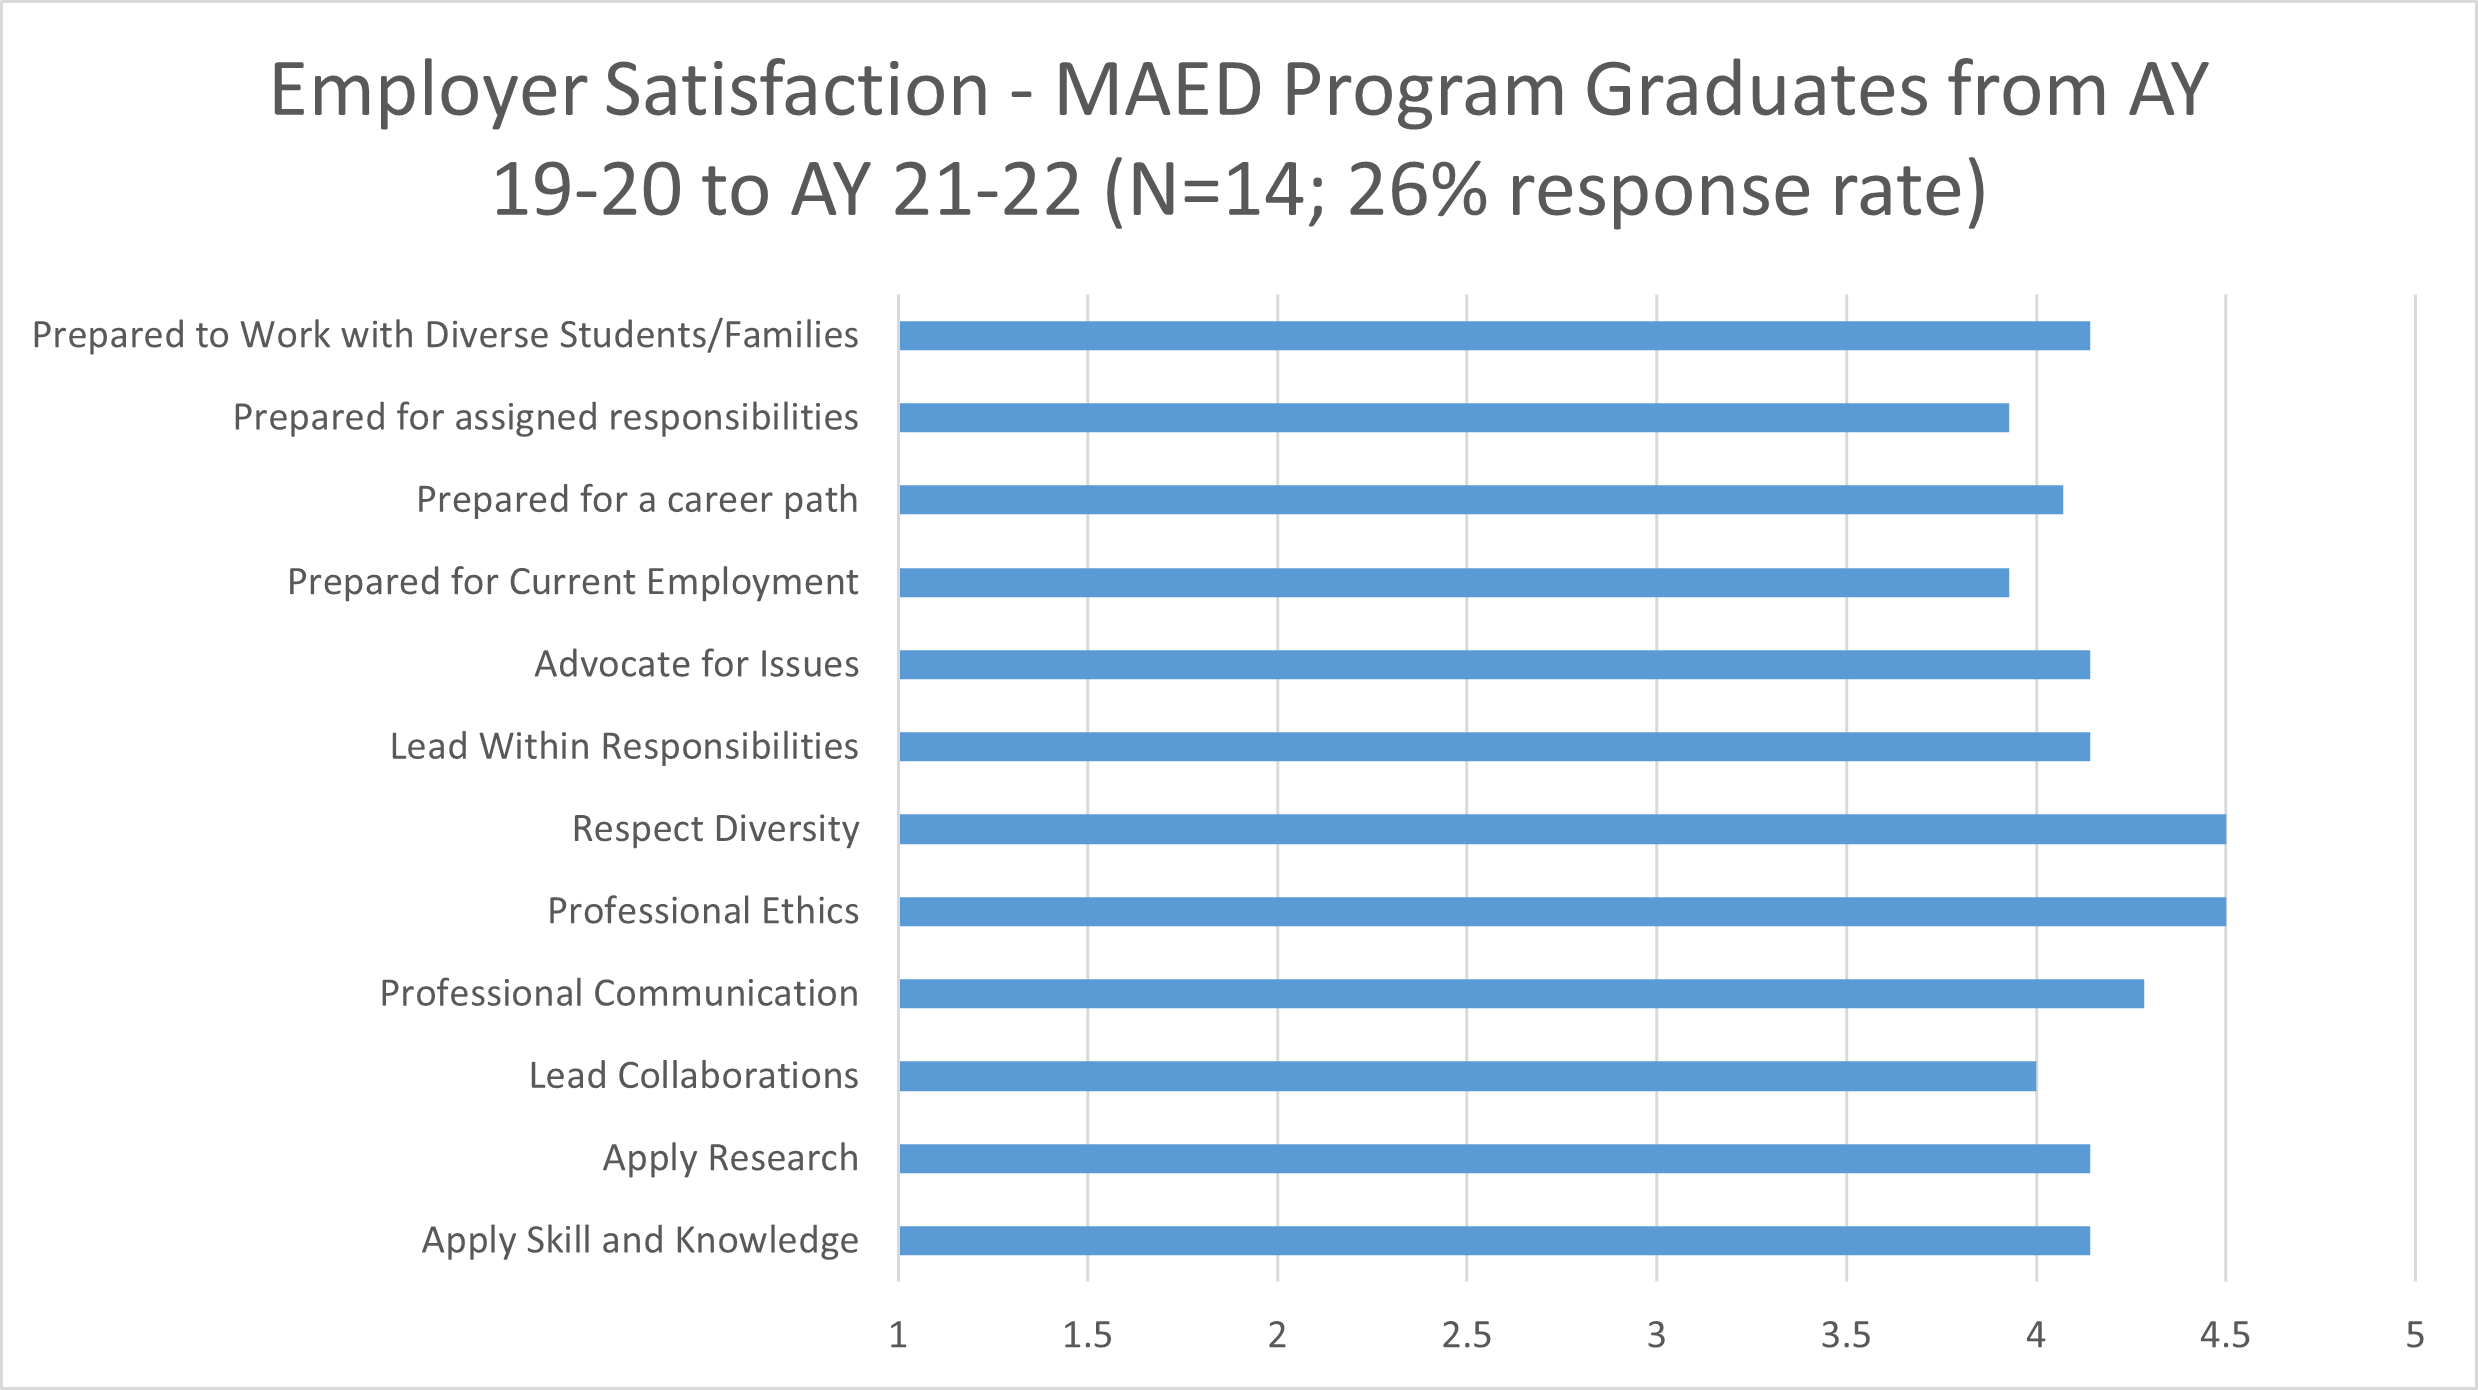 Bar graph showing satisfaction ratings of employers of MAED program graduates. More information in text.